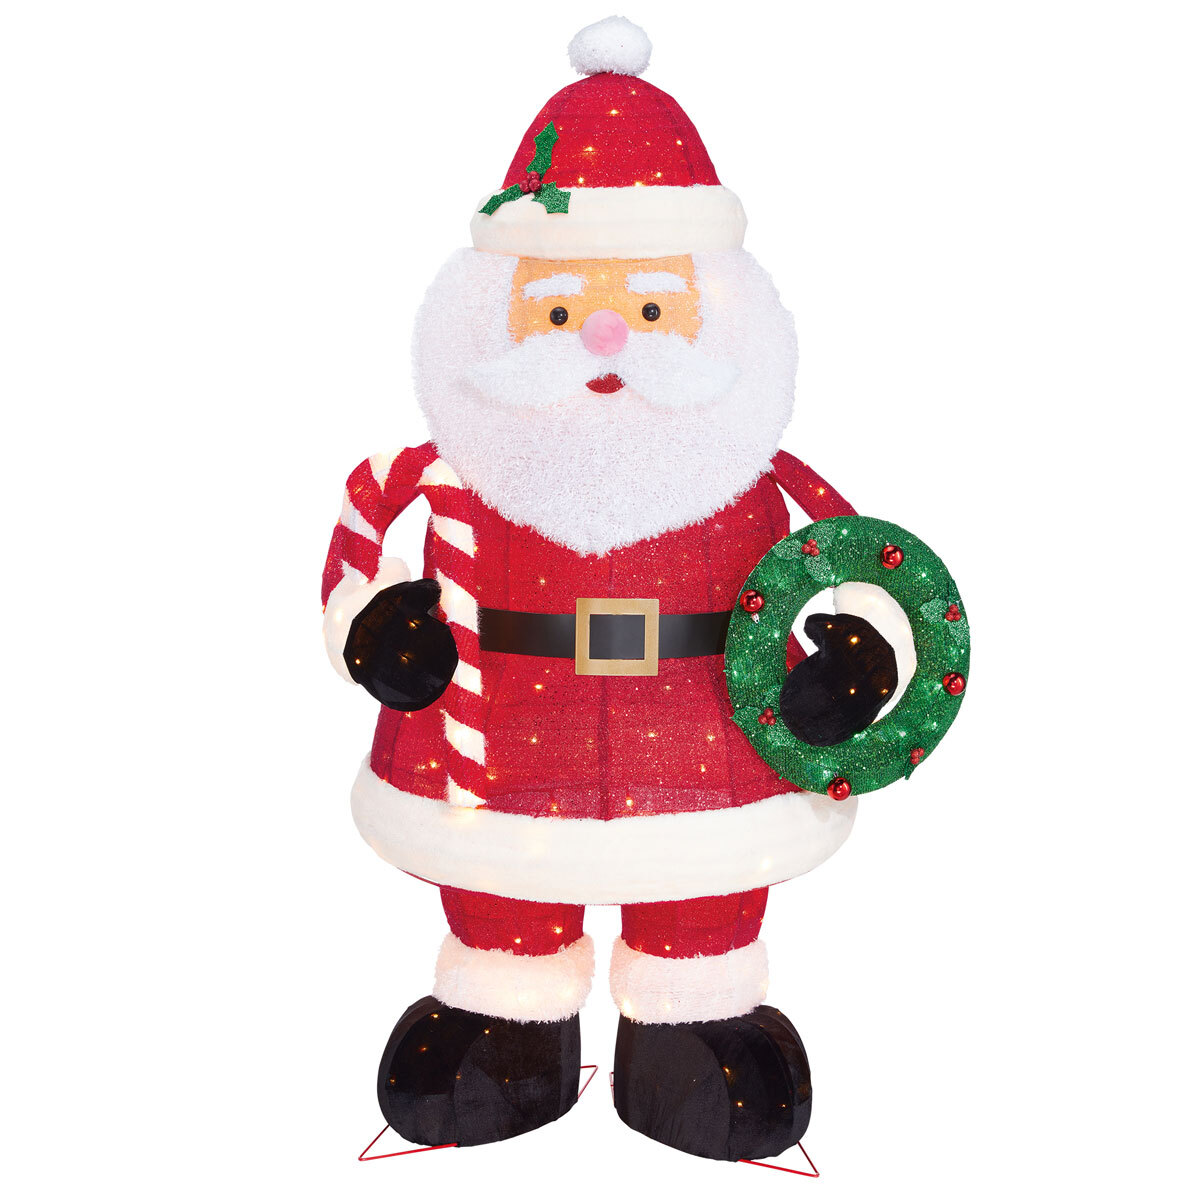 Buy 72" Pop-Up Santa with LED Overview Image at Costco.co.uk